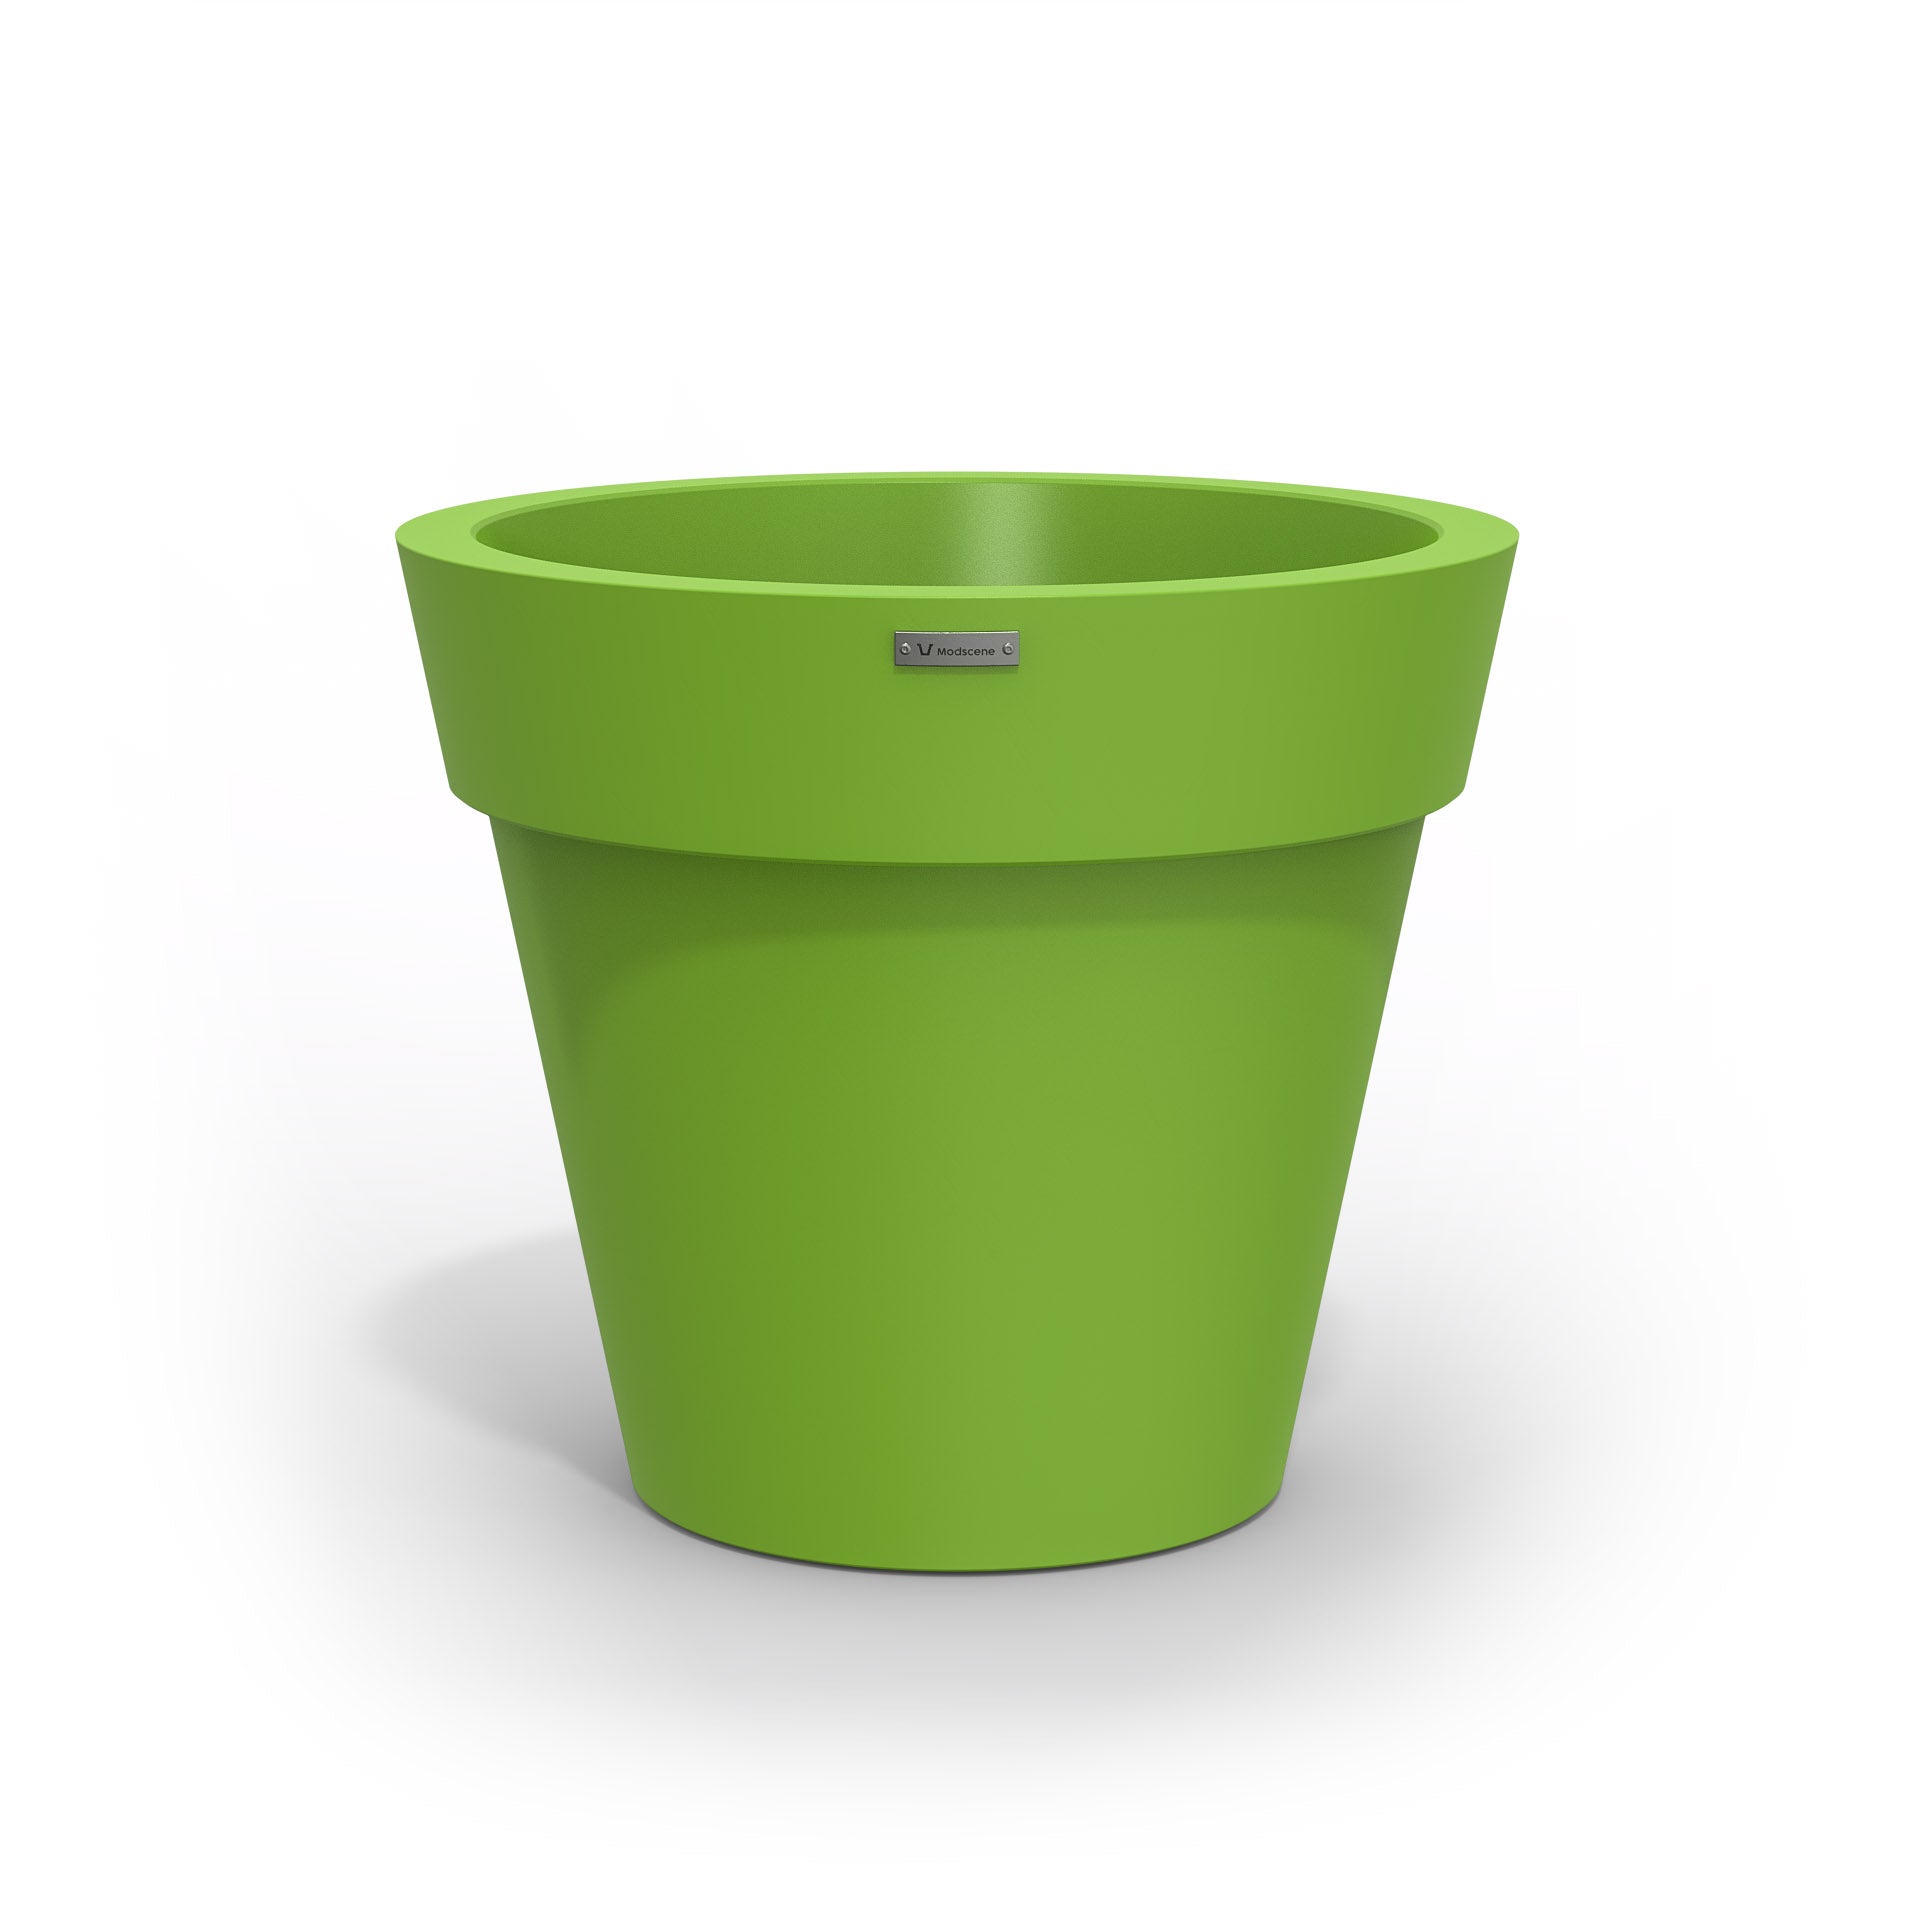 A Modscene plastic planter pot made in a green colour. NZ made.